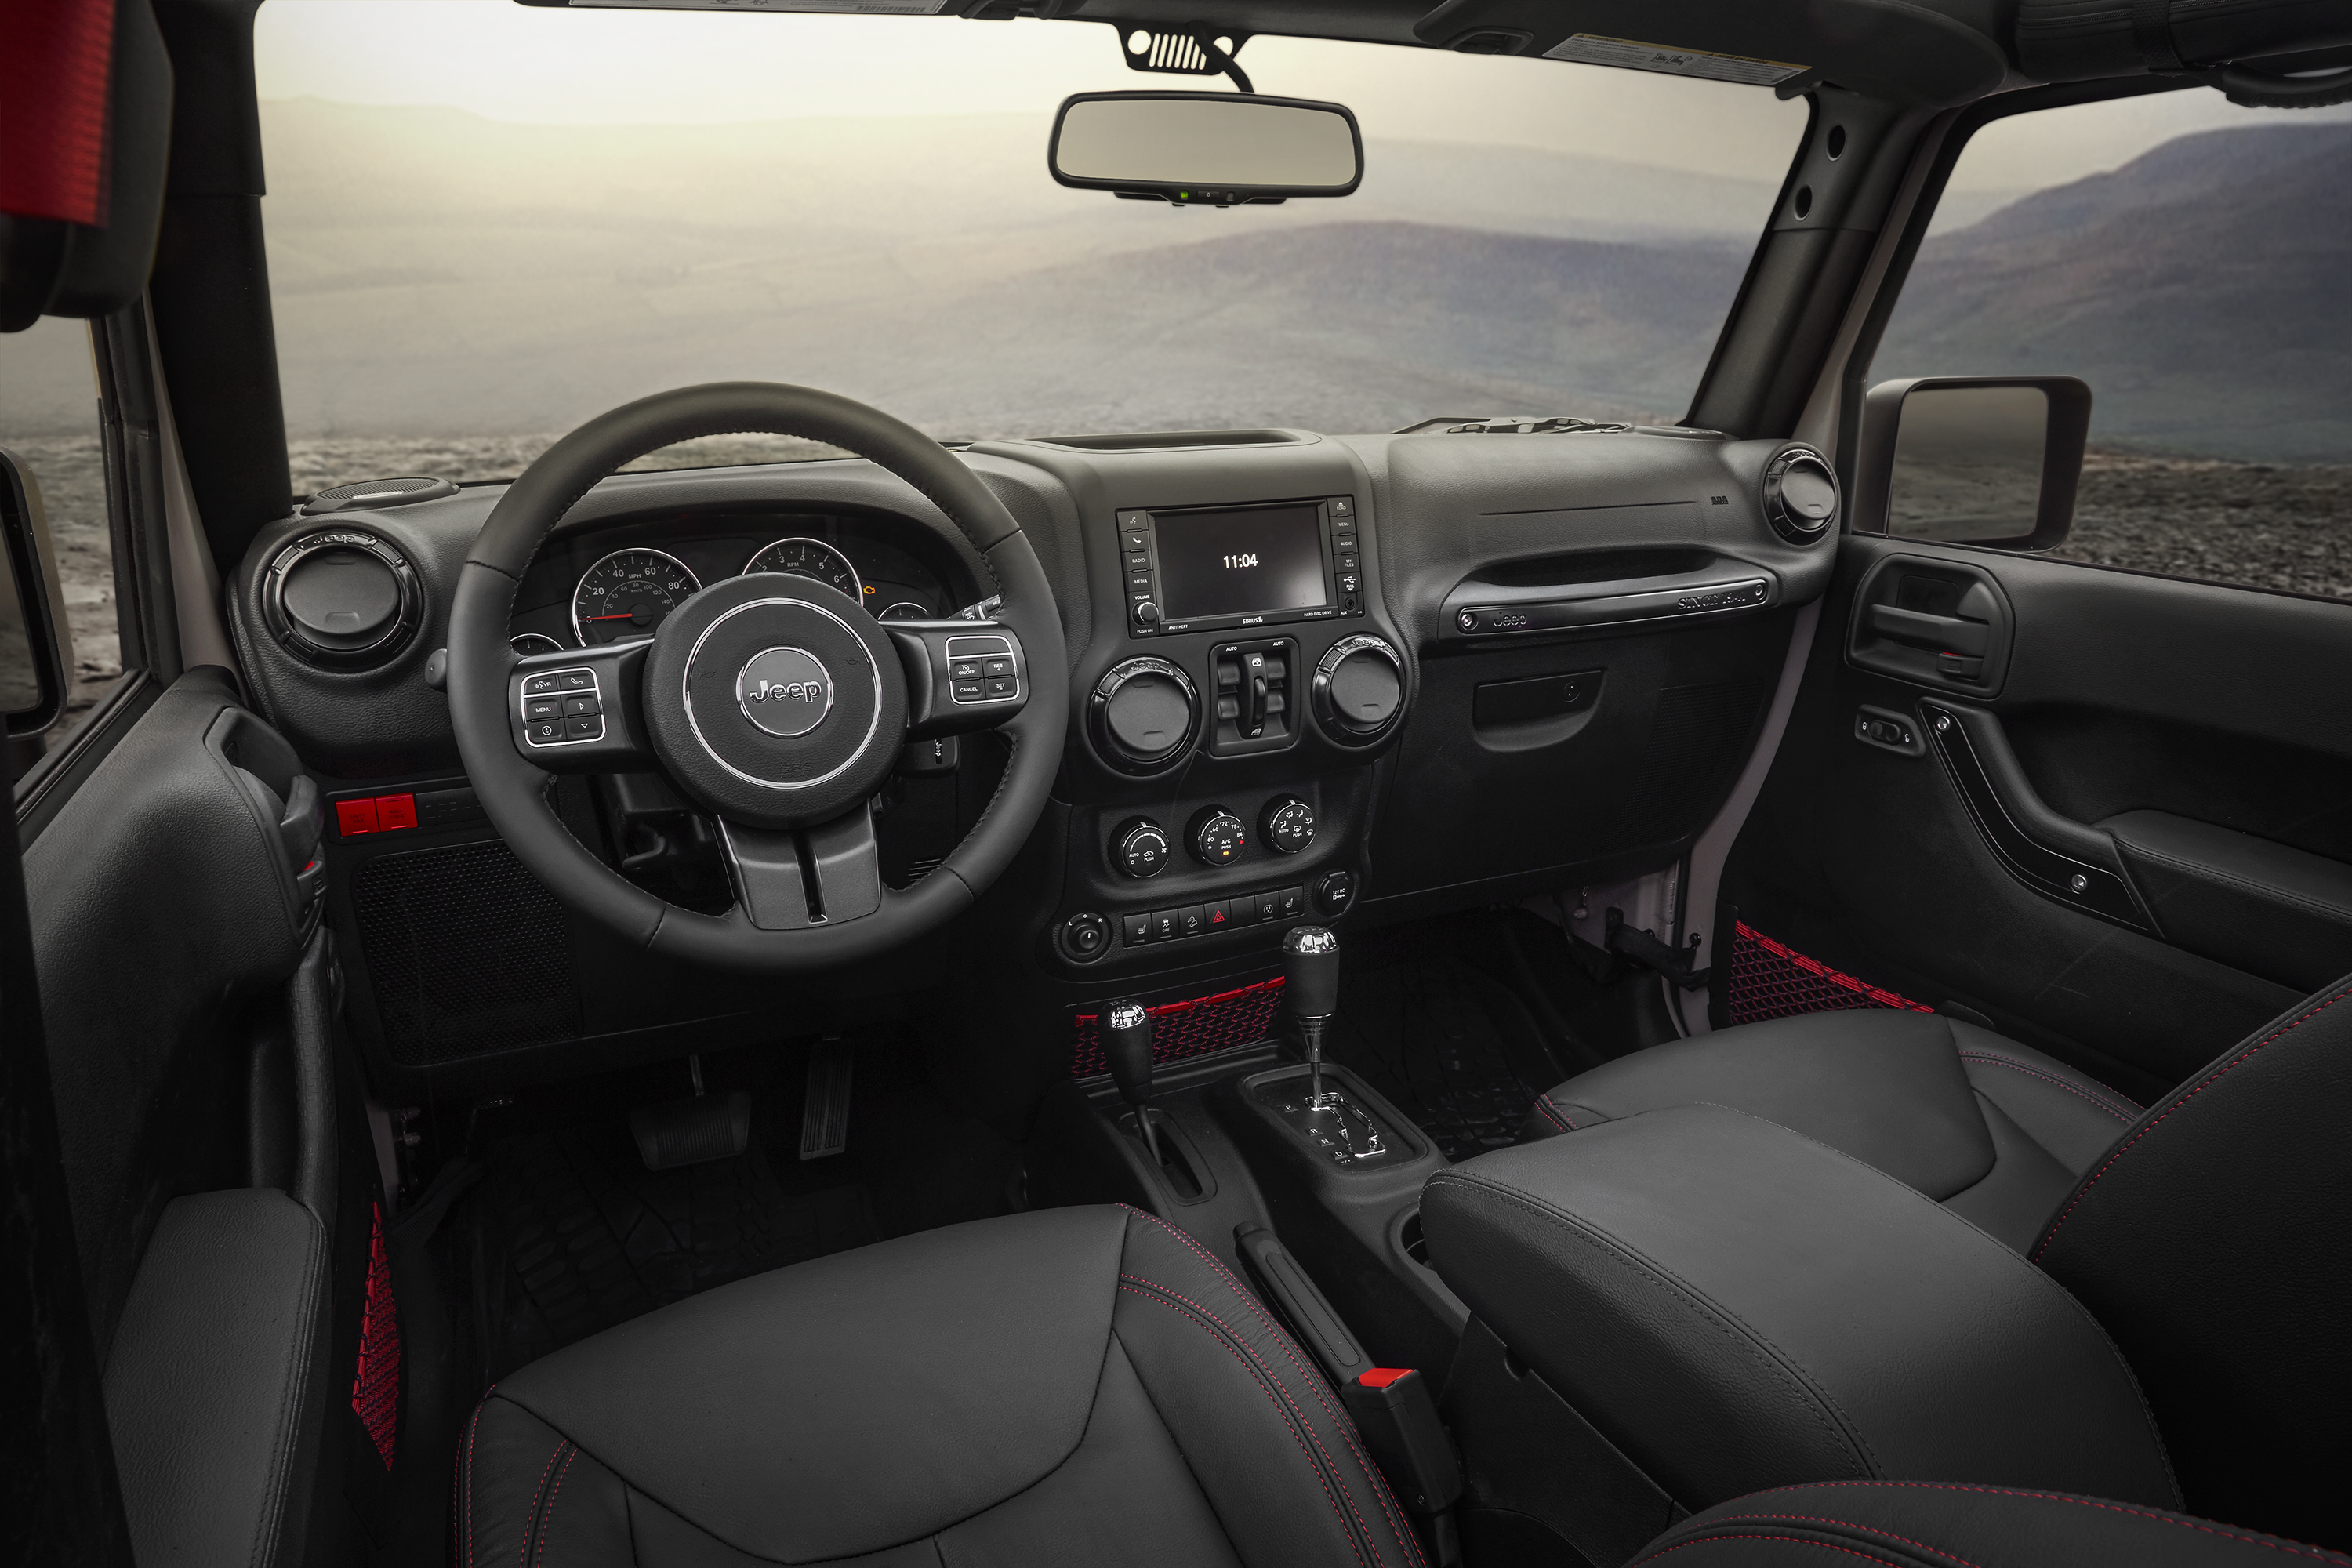 Jeep Wrangler Unlimited 4k restyling